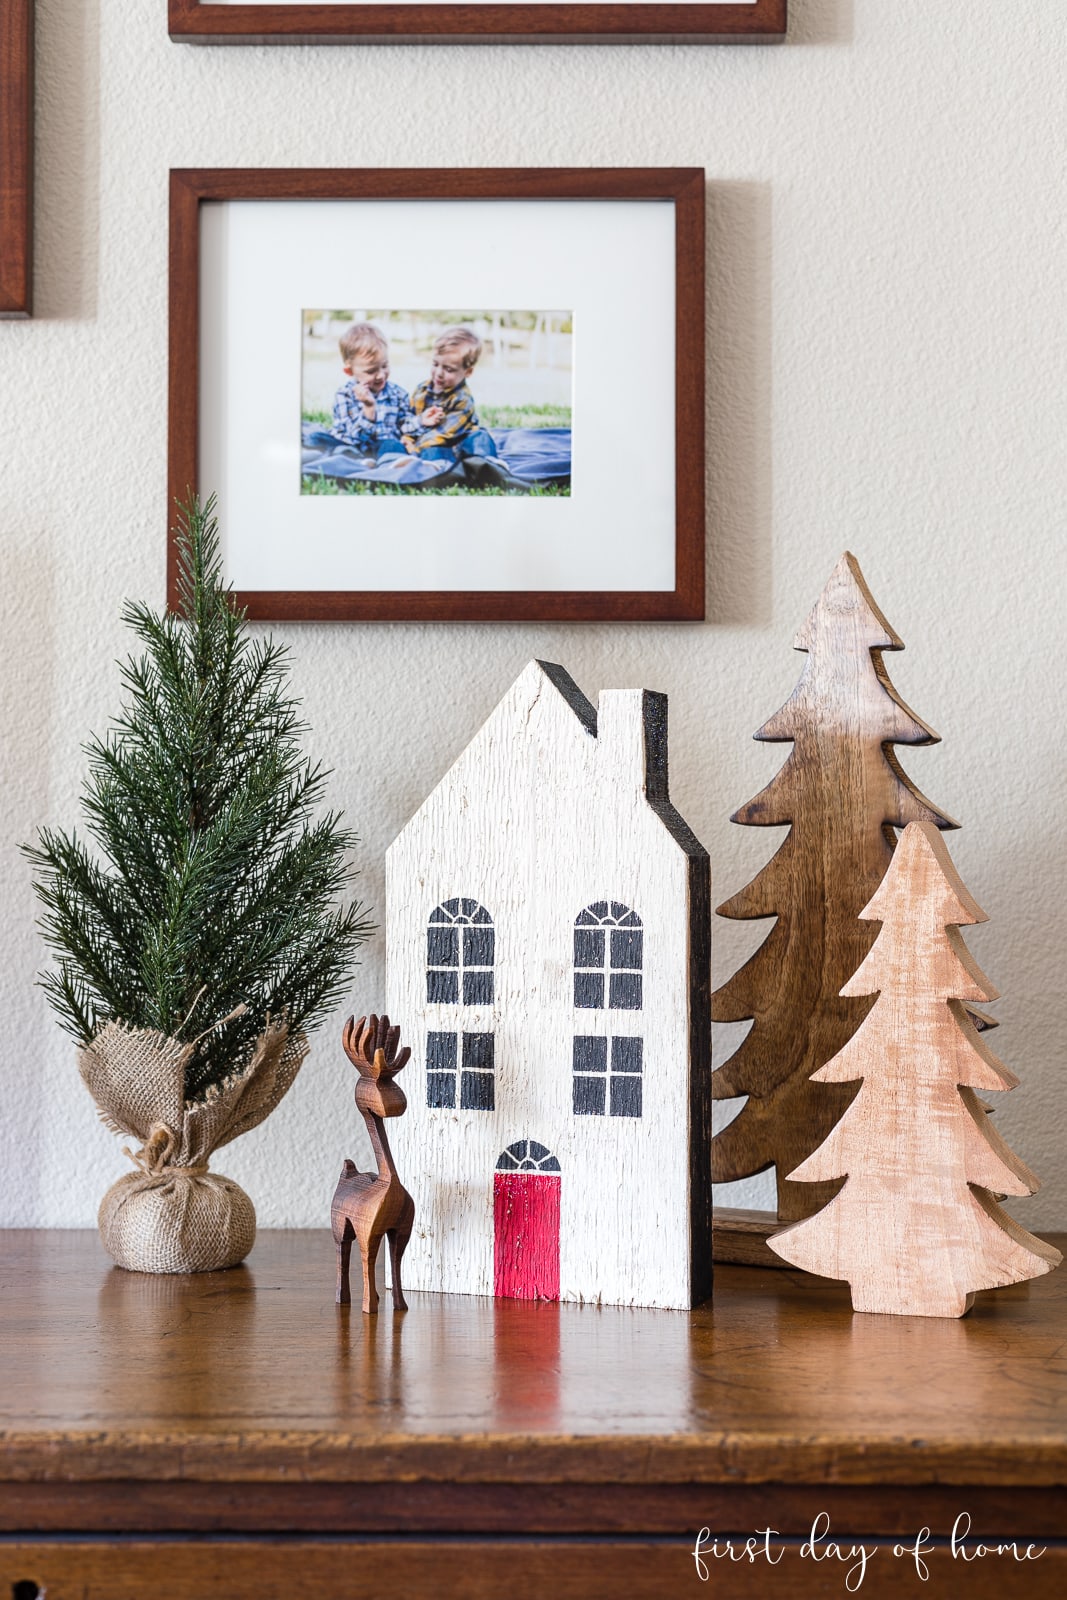 Christmas village with wooden houses and wood Christmas trees